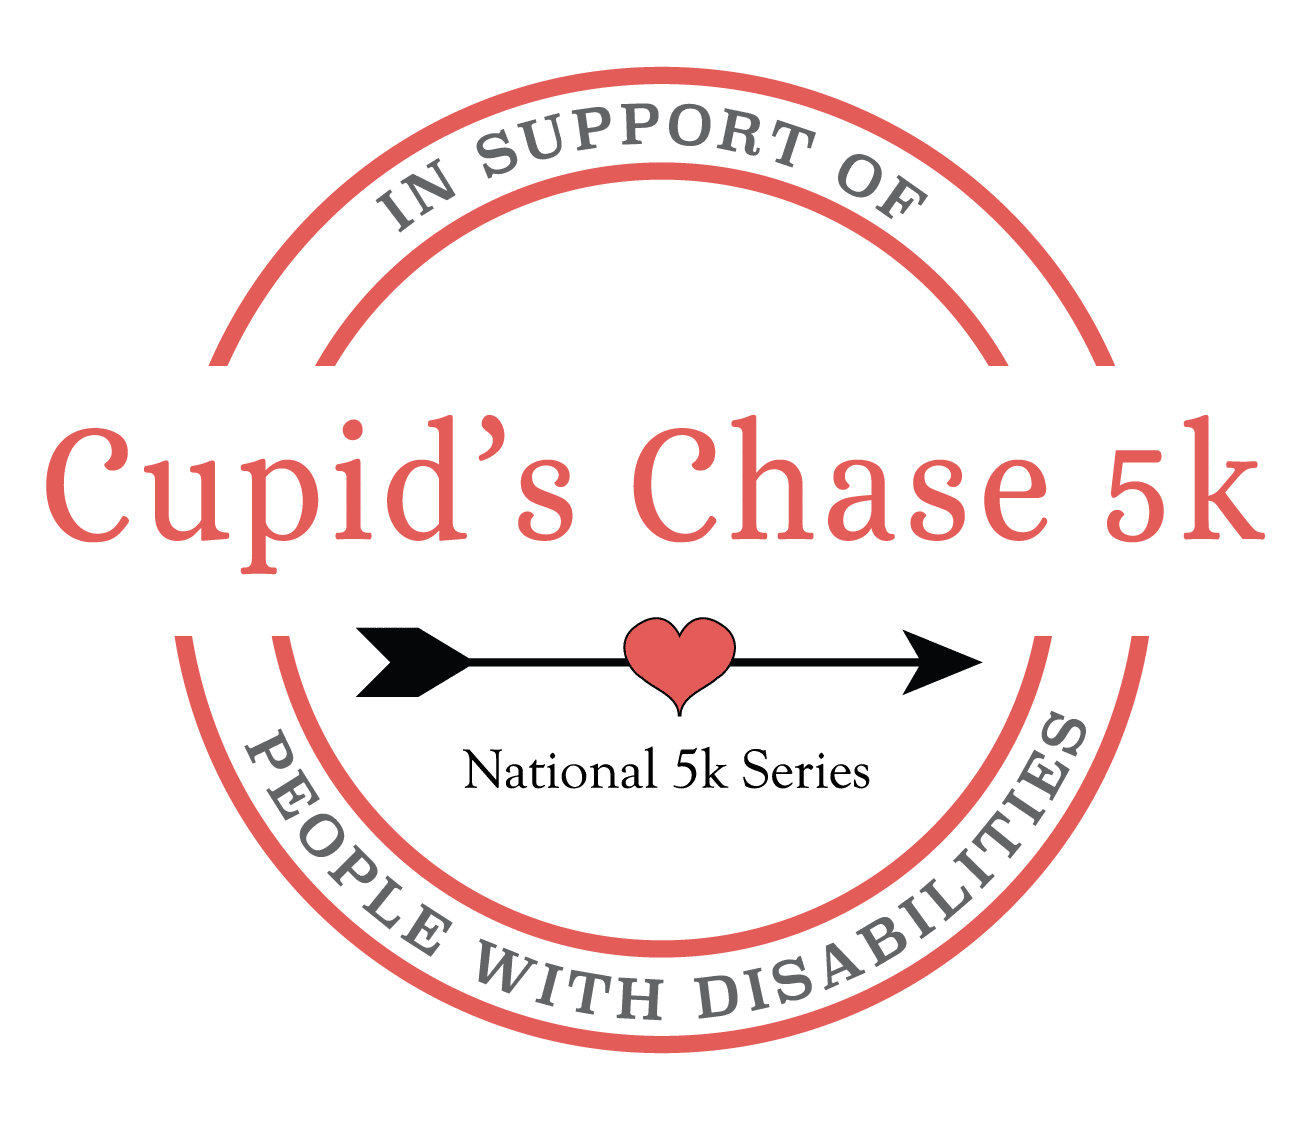 Cupid's Chase 5k Logo National 5k Series In support of people with disabilities